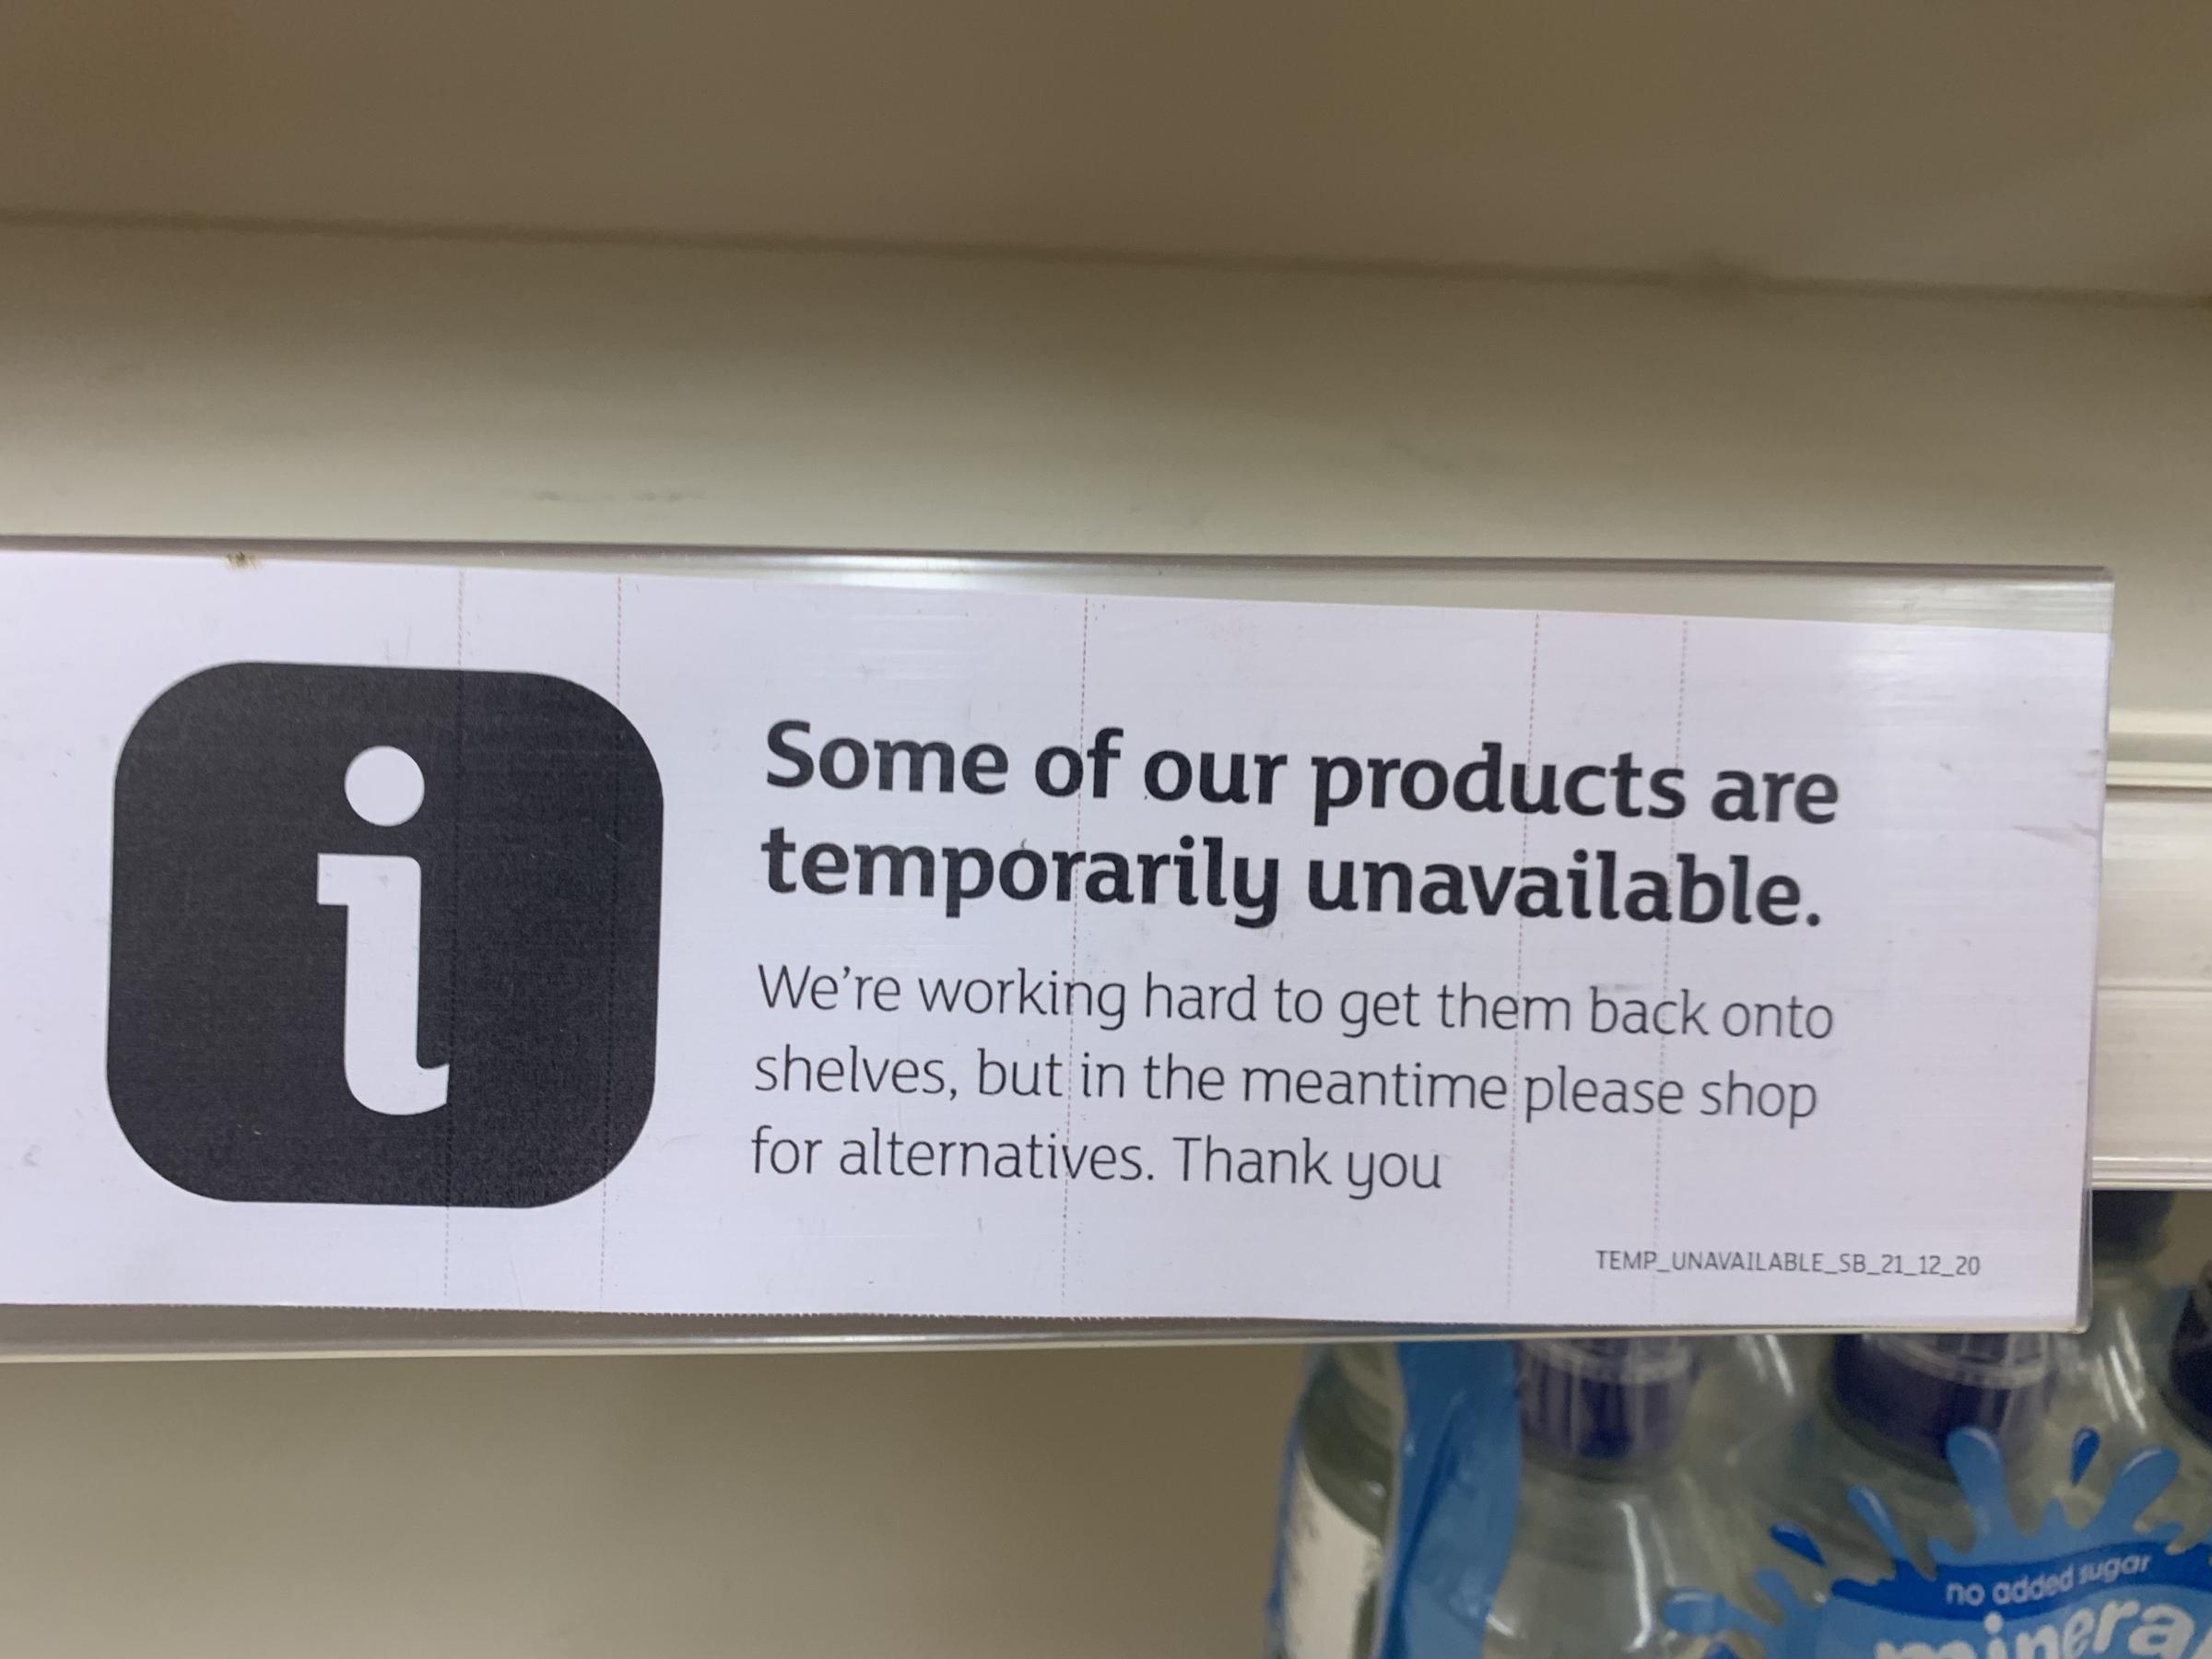 These signs were placed at many aisles in Sainsburys